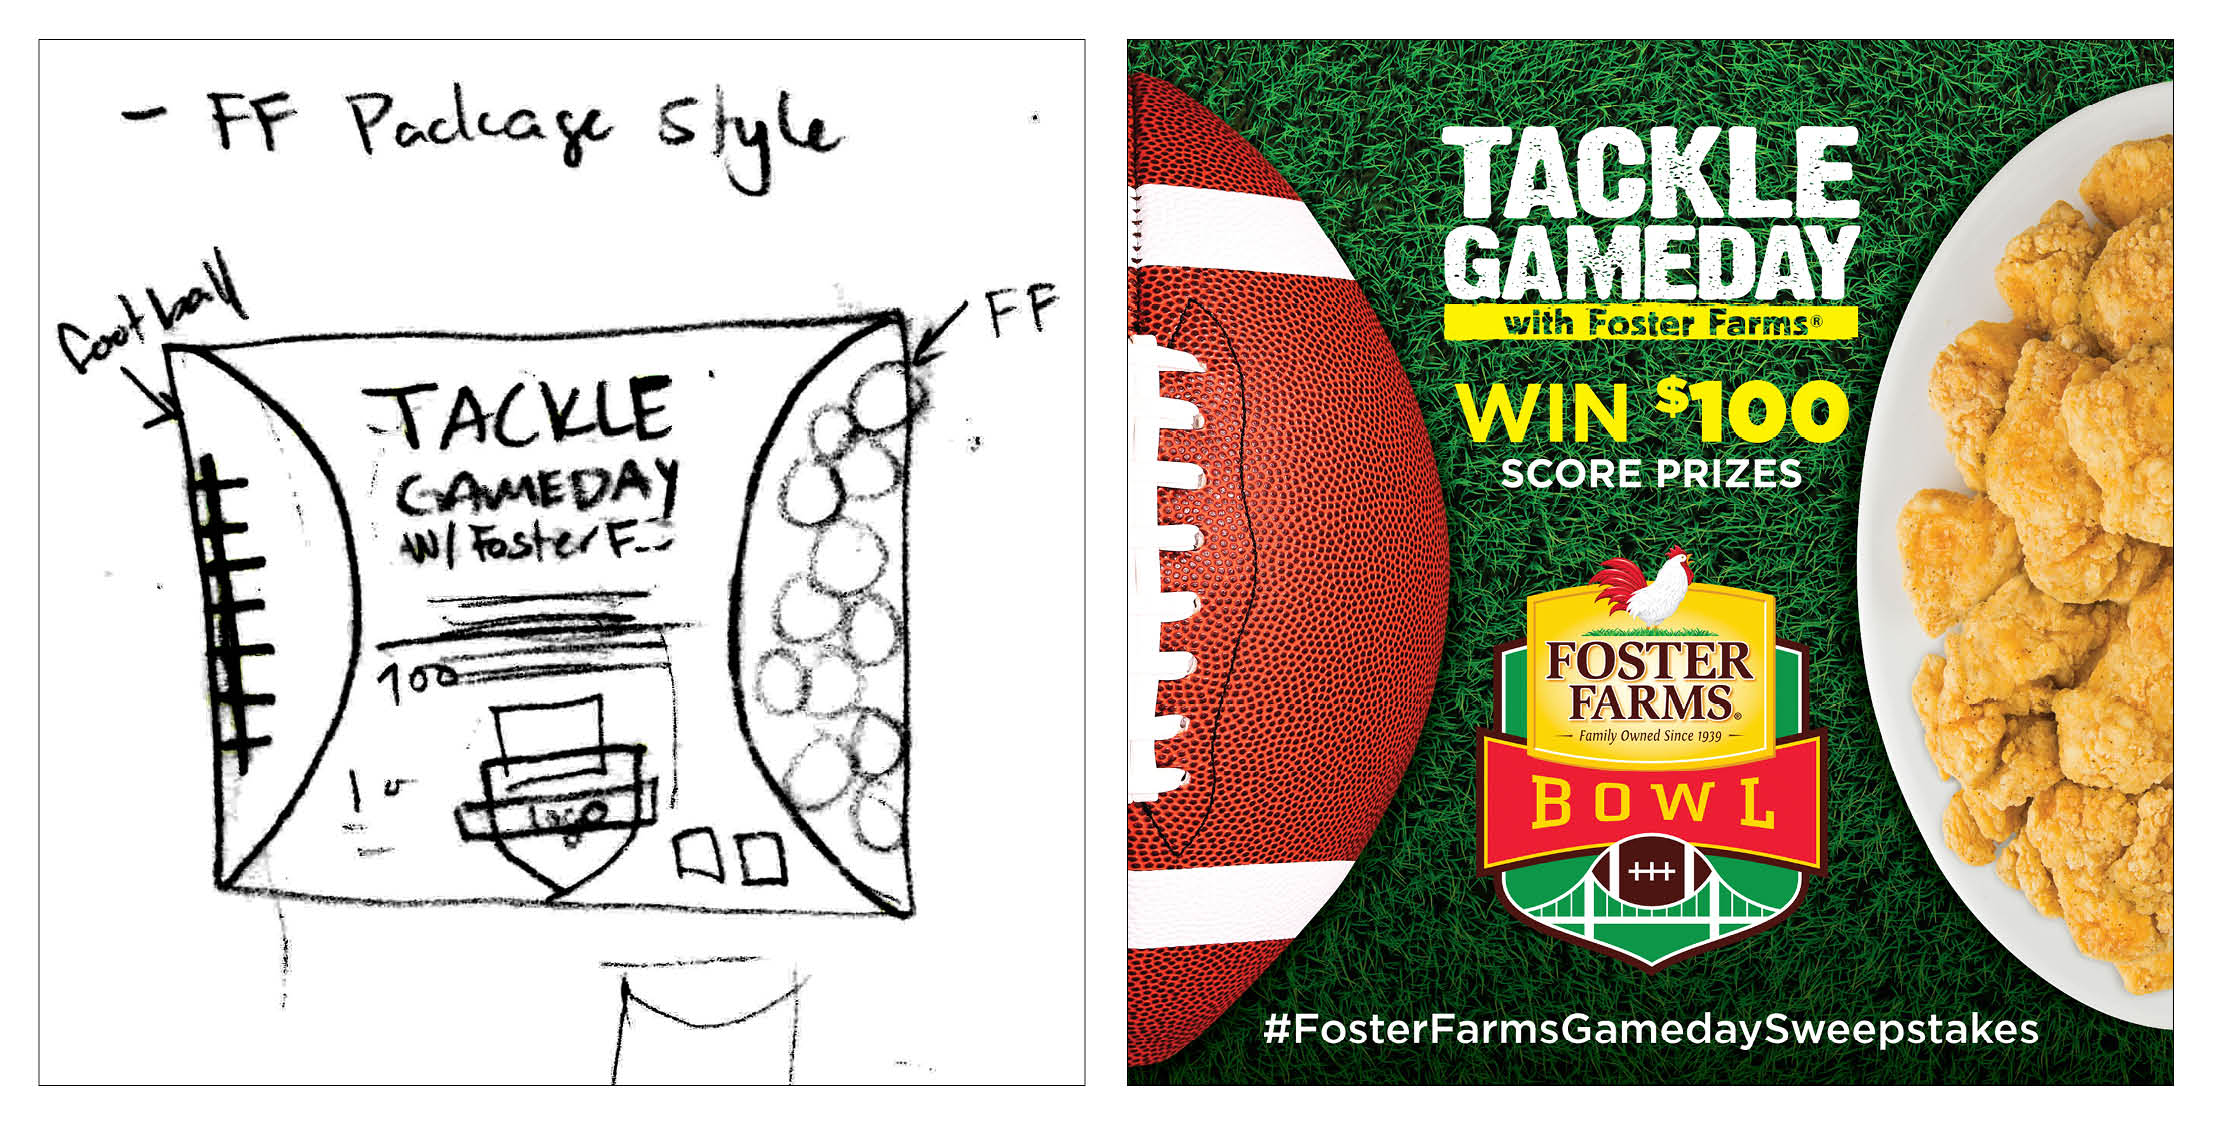  COMPANY: Foster Farms  PROJET: Social Media Posts  MY ROLE: Created and executed concepts for Foster Farms Gameday Campaign with direction from the marketing team. Platforms included Facebook, Instagram and Twitter. 